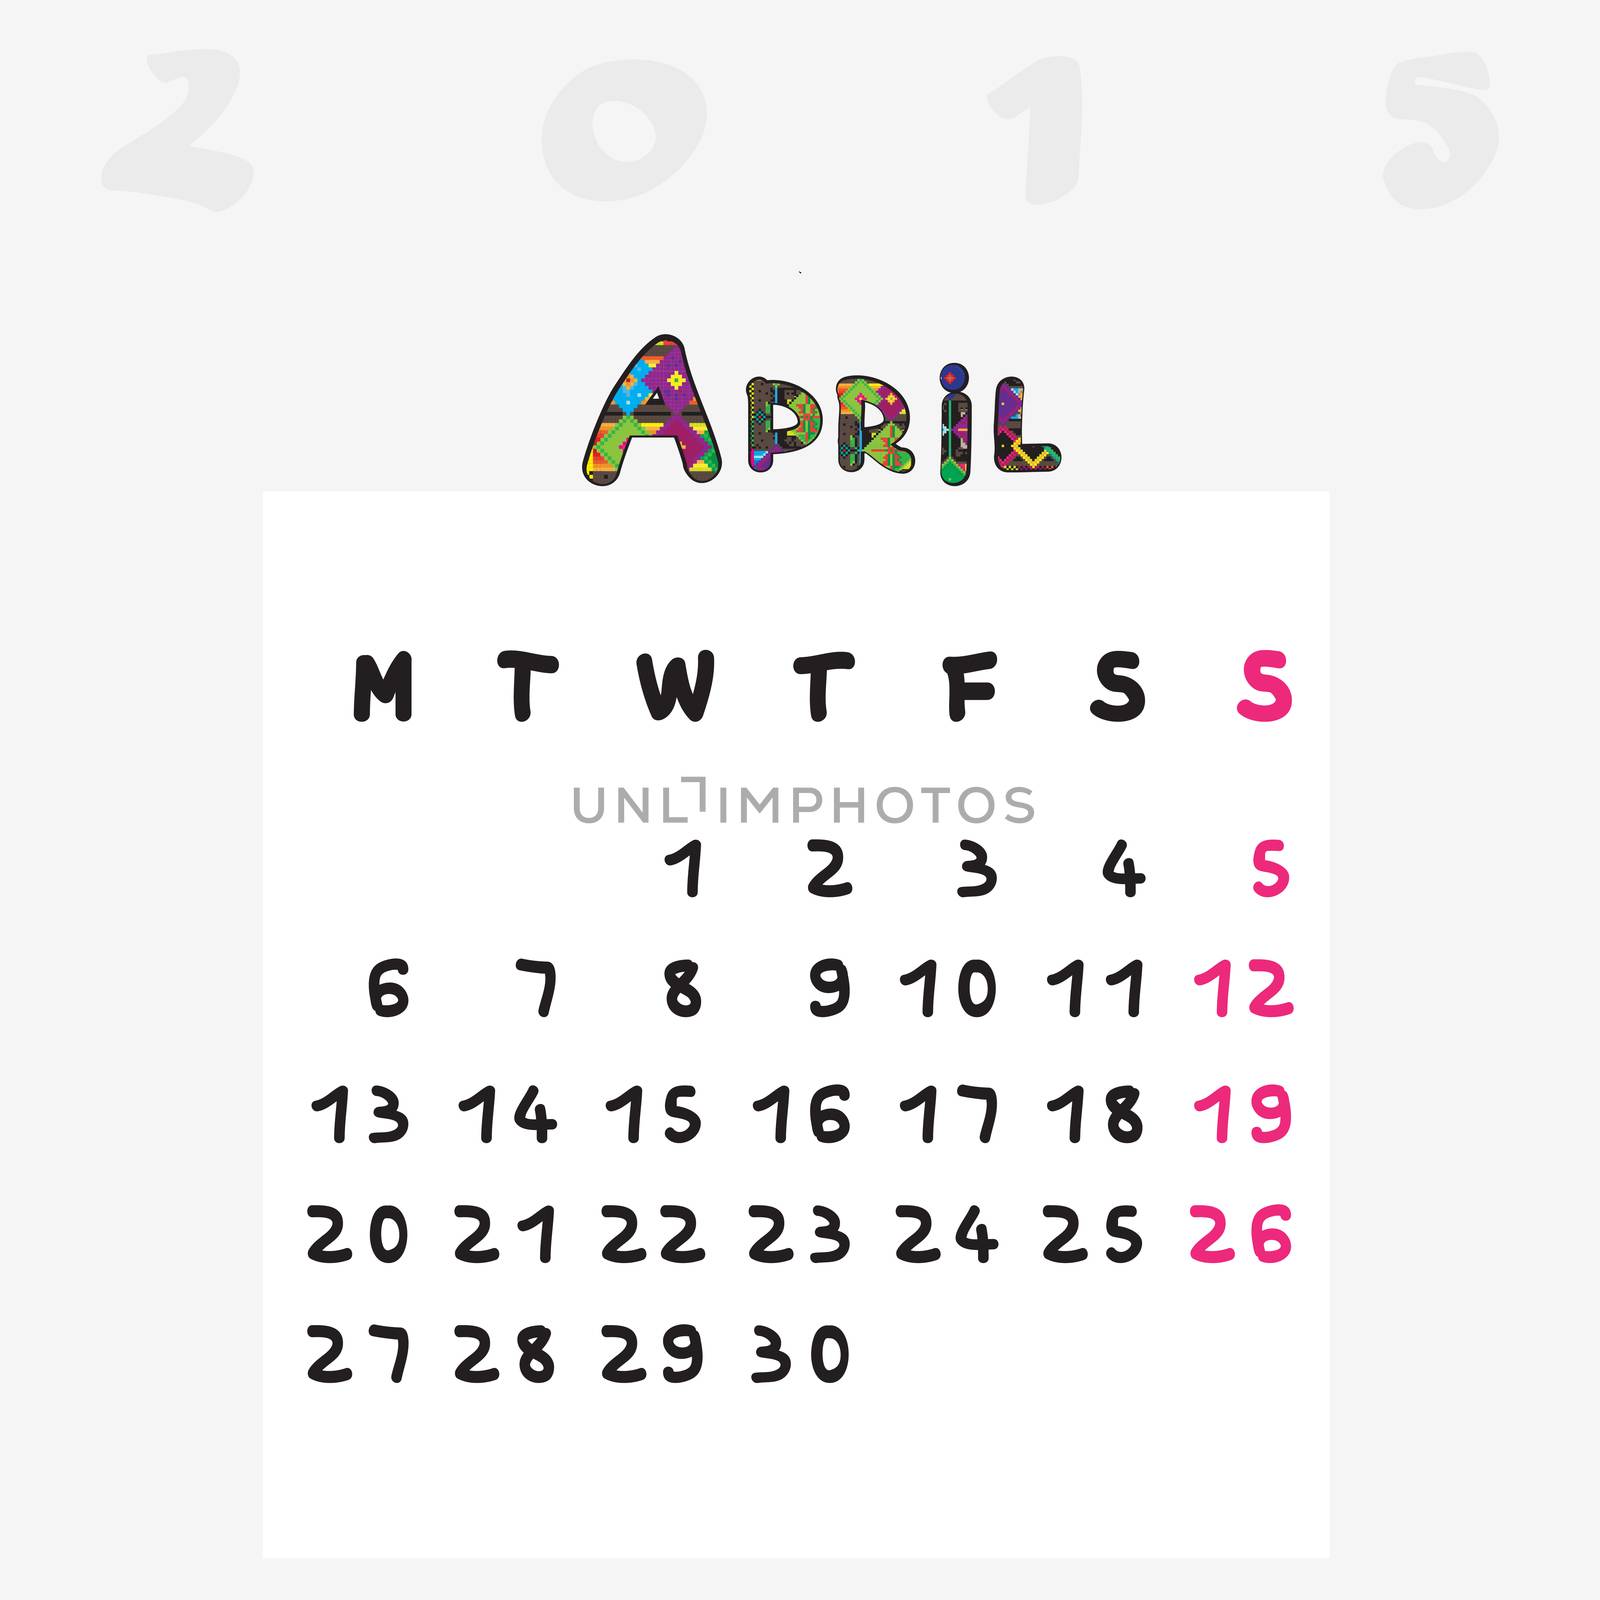 Calendar 2015, graphic illustration of April monthly calendar with original hand drawn text and colored capital letters for kids